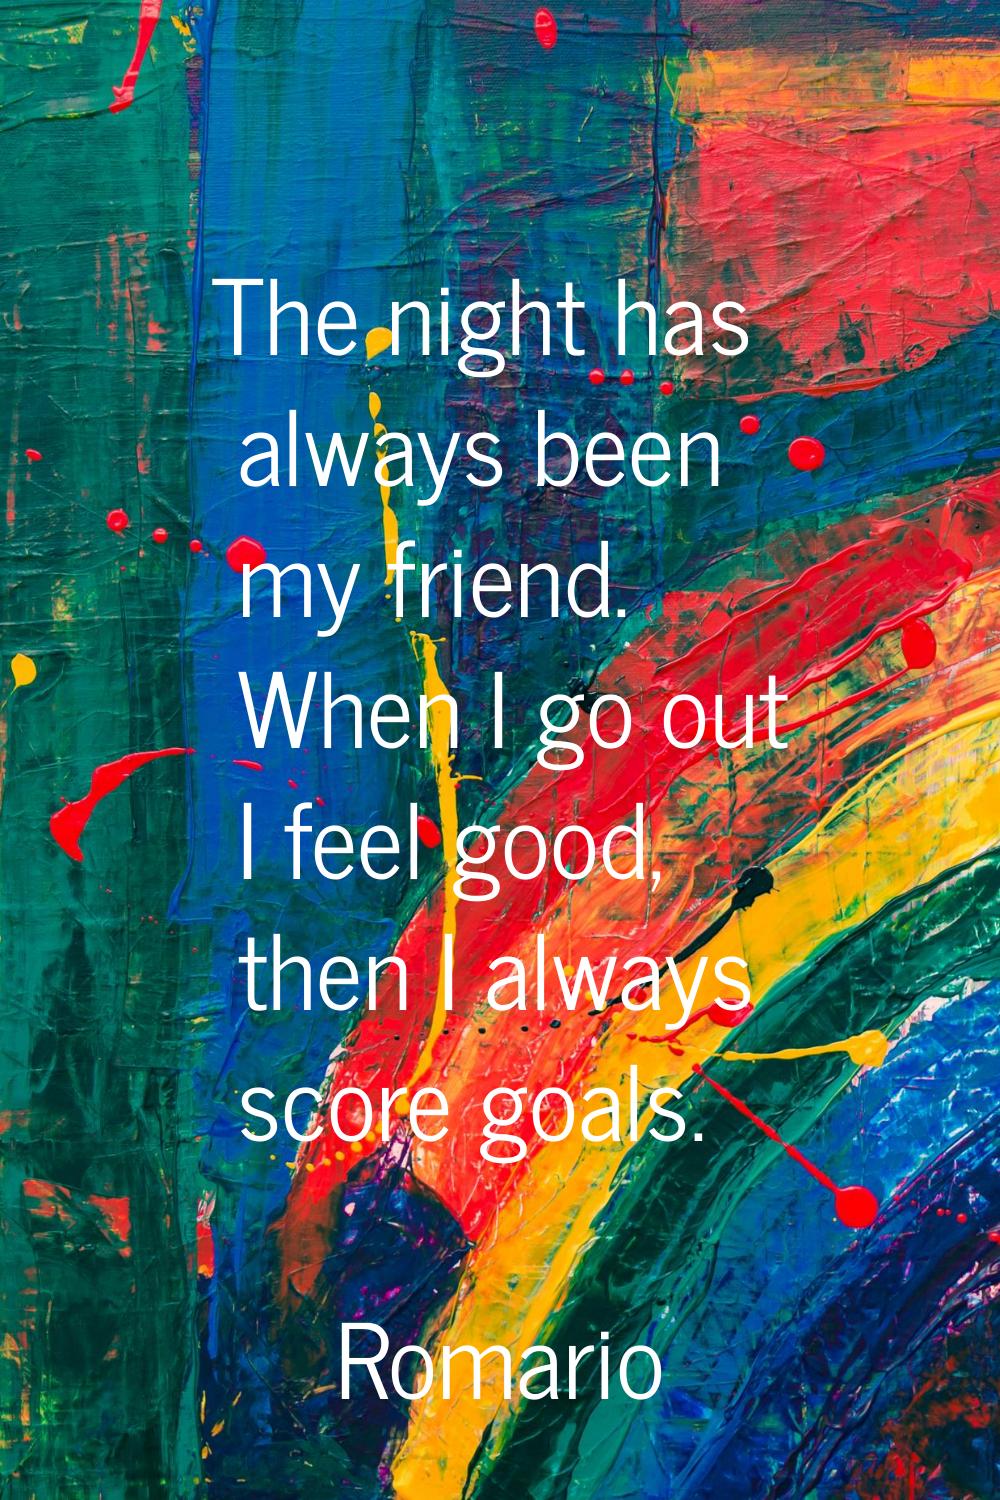 The night has always been my friend. When I go out I feel good, then I always score goals.